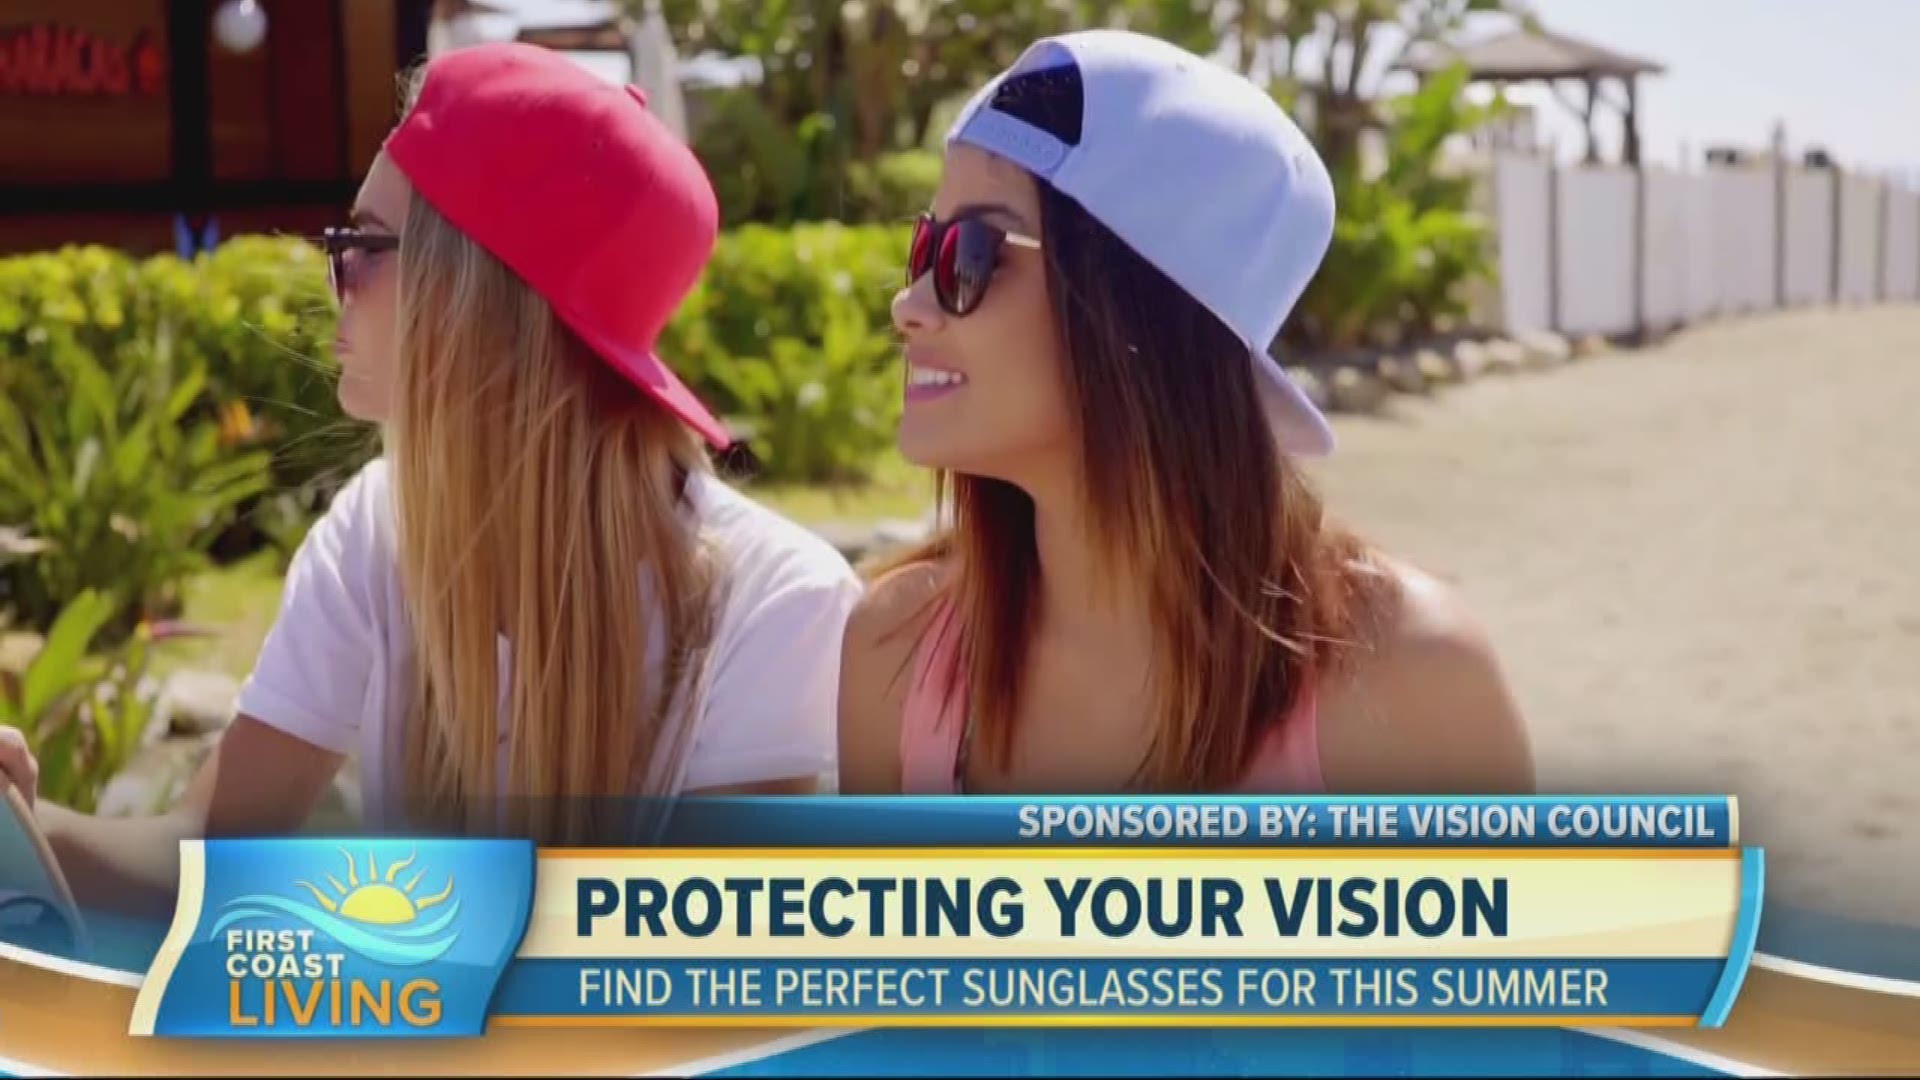 A stylist shares tips to find protective shades with some style to look trendy all summer long.